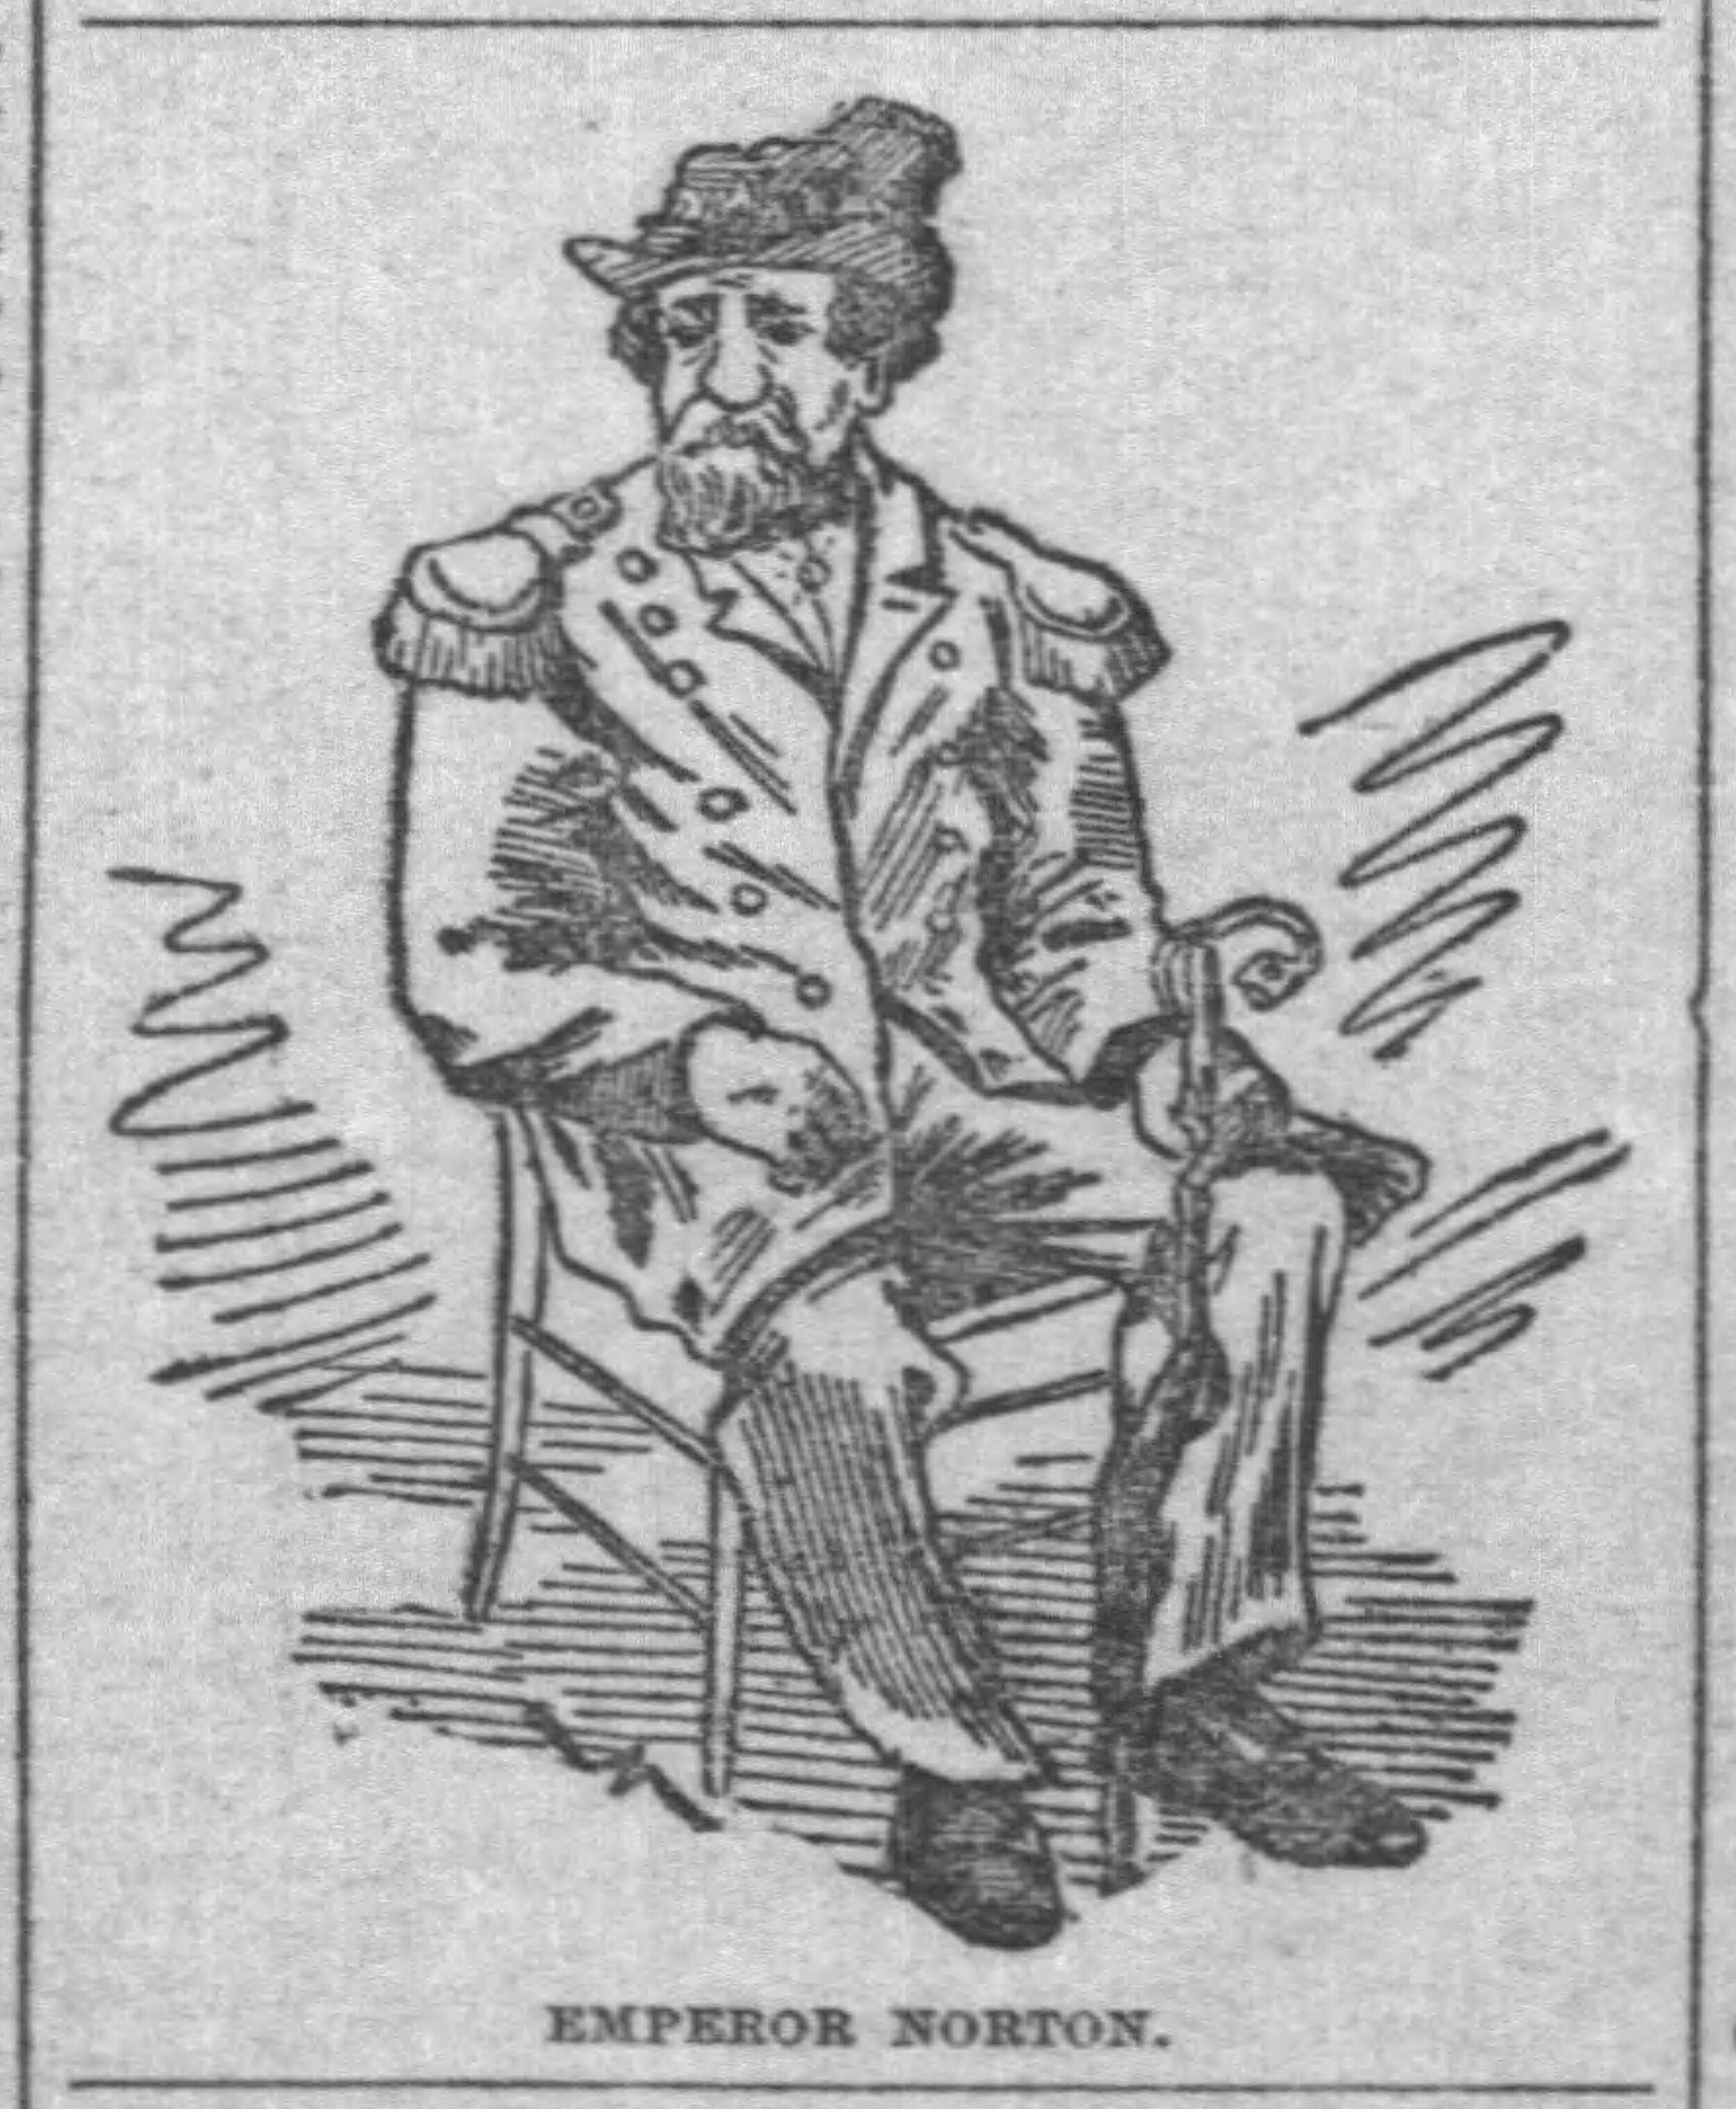   Illustration of Emperor Norton.  Published with article, “After S’Teen Years,”  San Francisco Examiner , 2 December 1888, p. 10.  Article reflected on changes in San Francisco in the sixteen years since 1872. Source: Newspapers.com [Added 10.5.2020